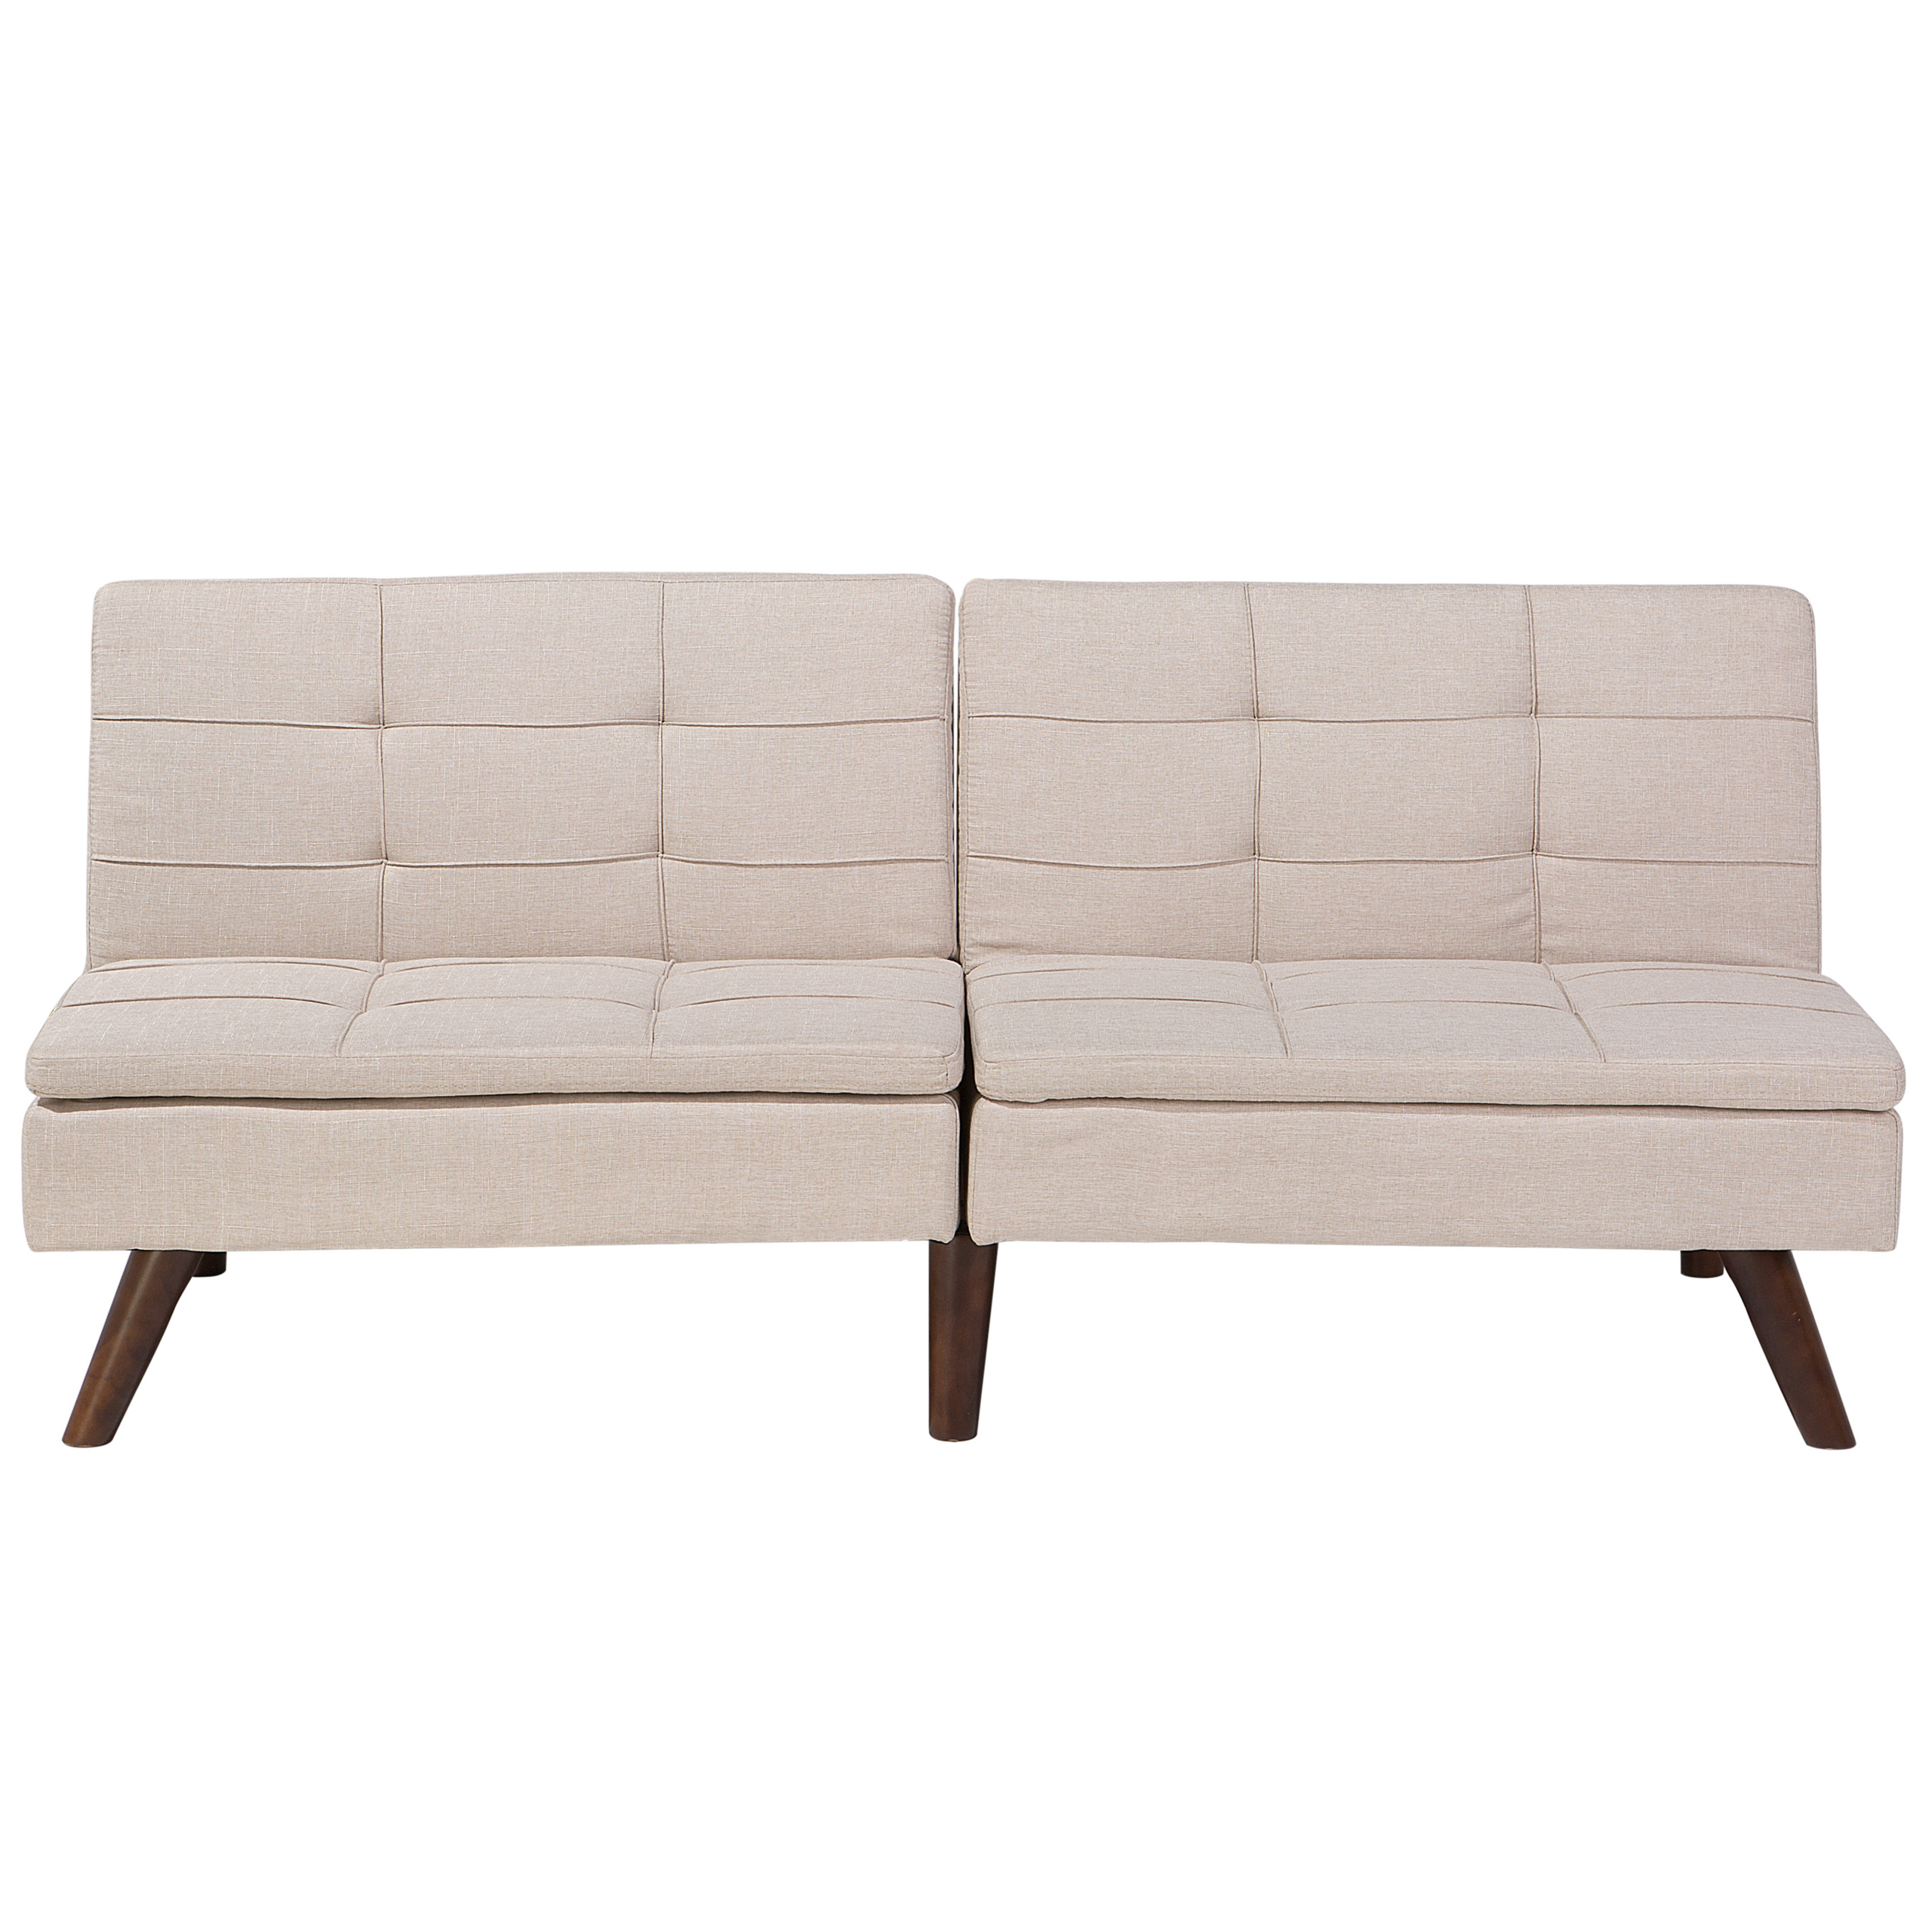 Beliani Sofa Bed Light Beige 3-Seater Quilted Upholstery Click Clack Split Back Metal Legs